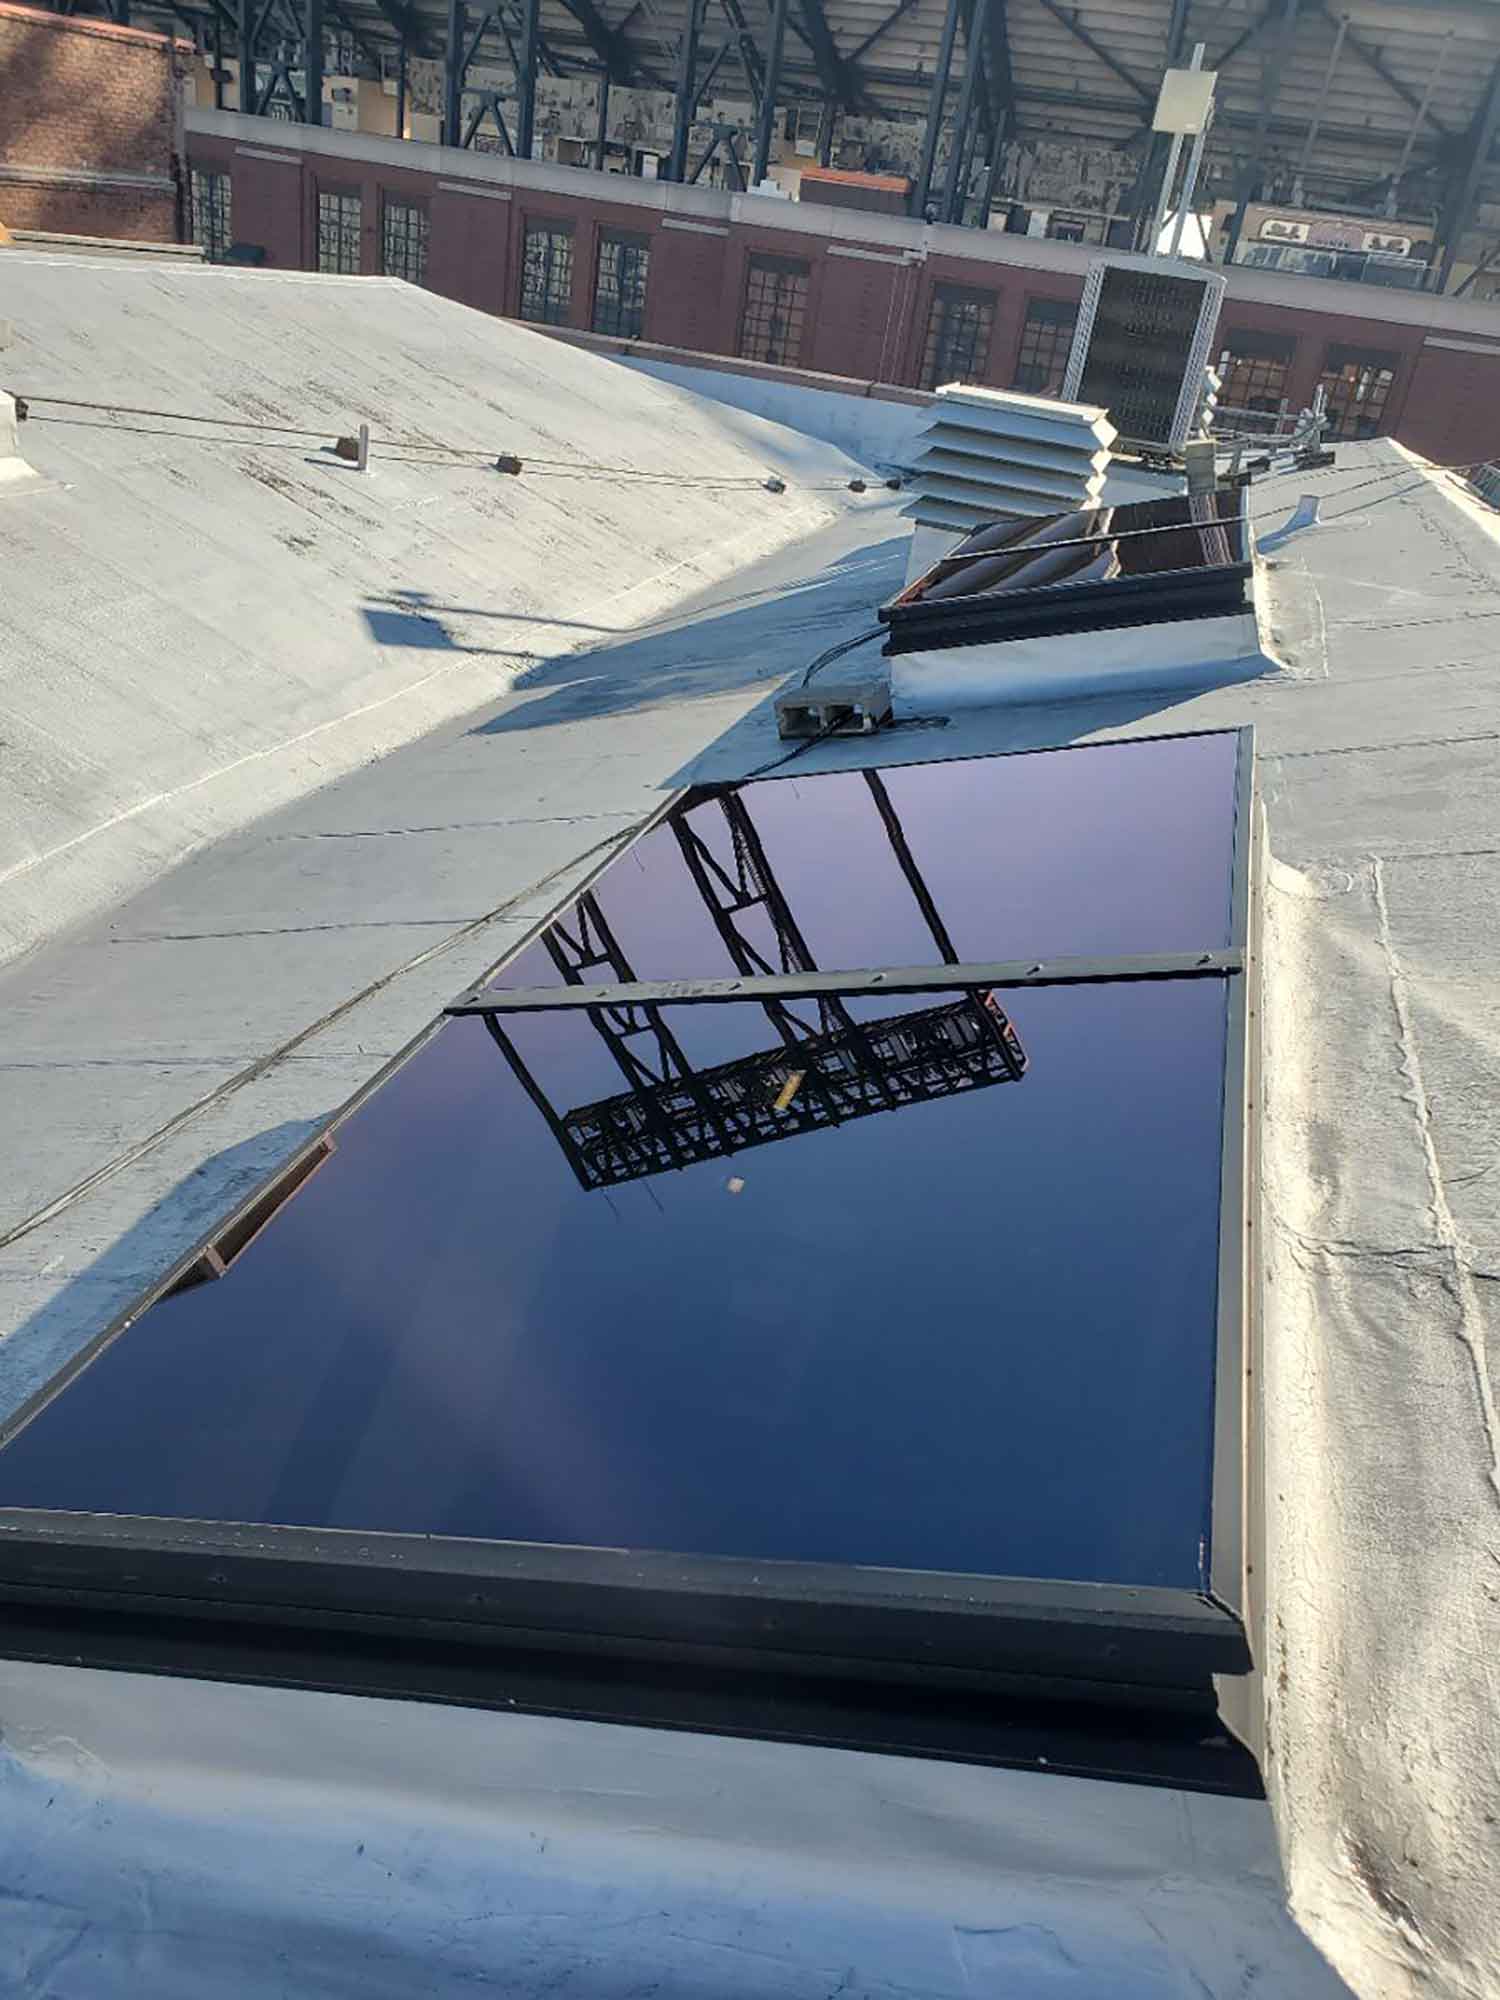 ClimatePro installed 3M Exterior window tint on these skylights in San Francisco.